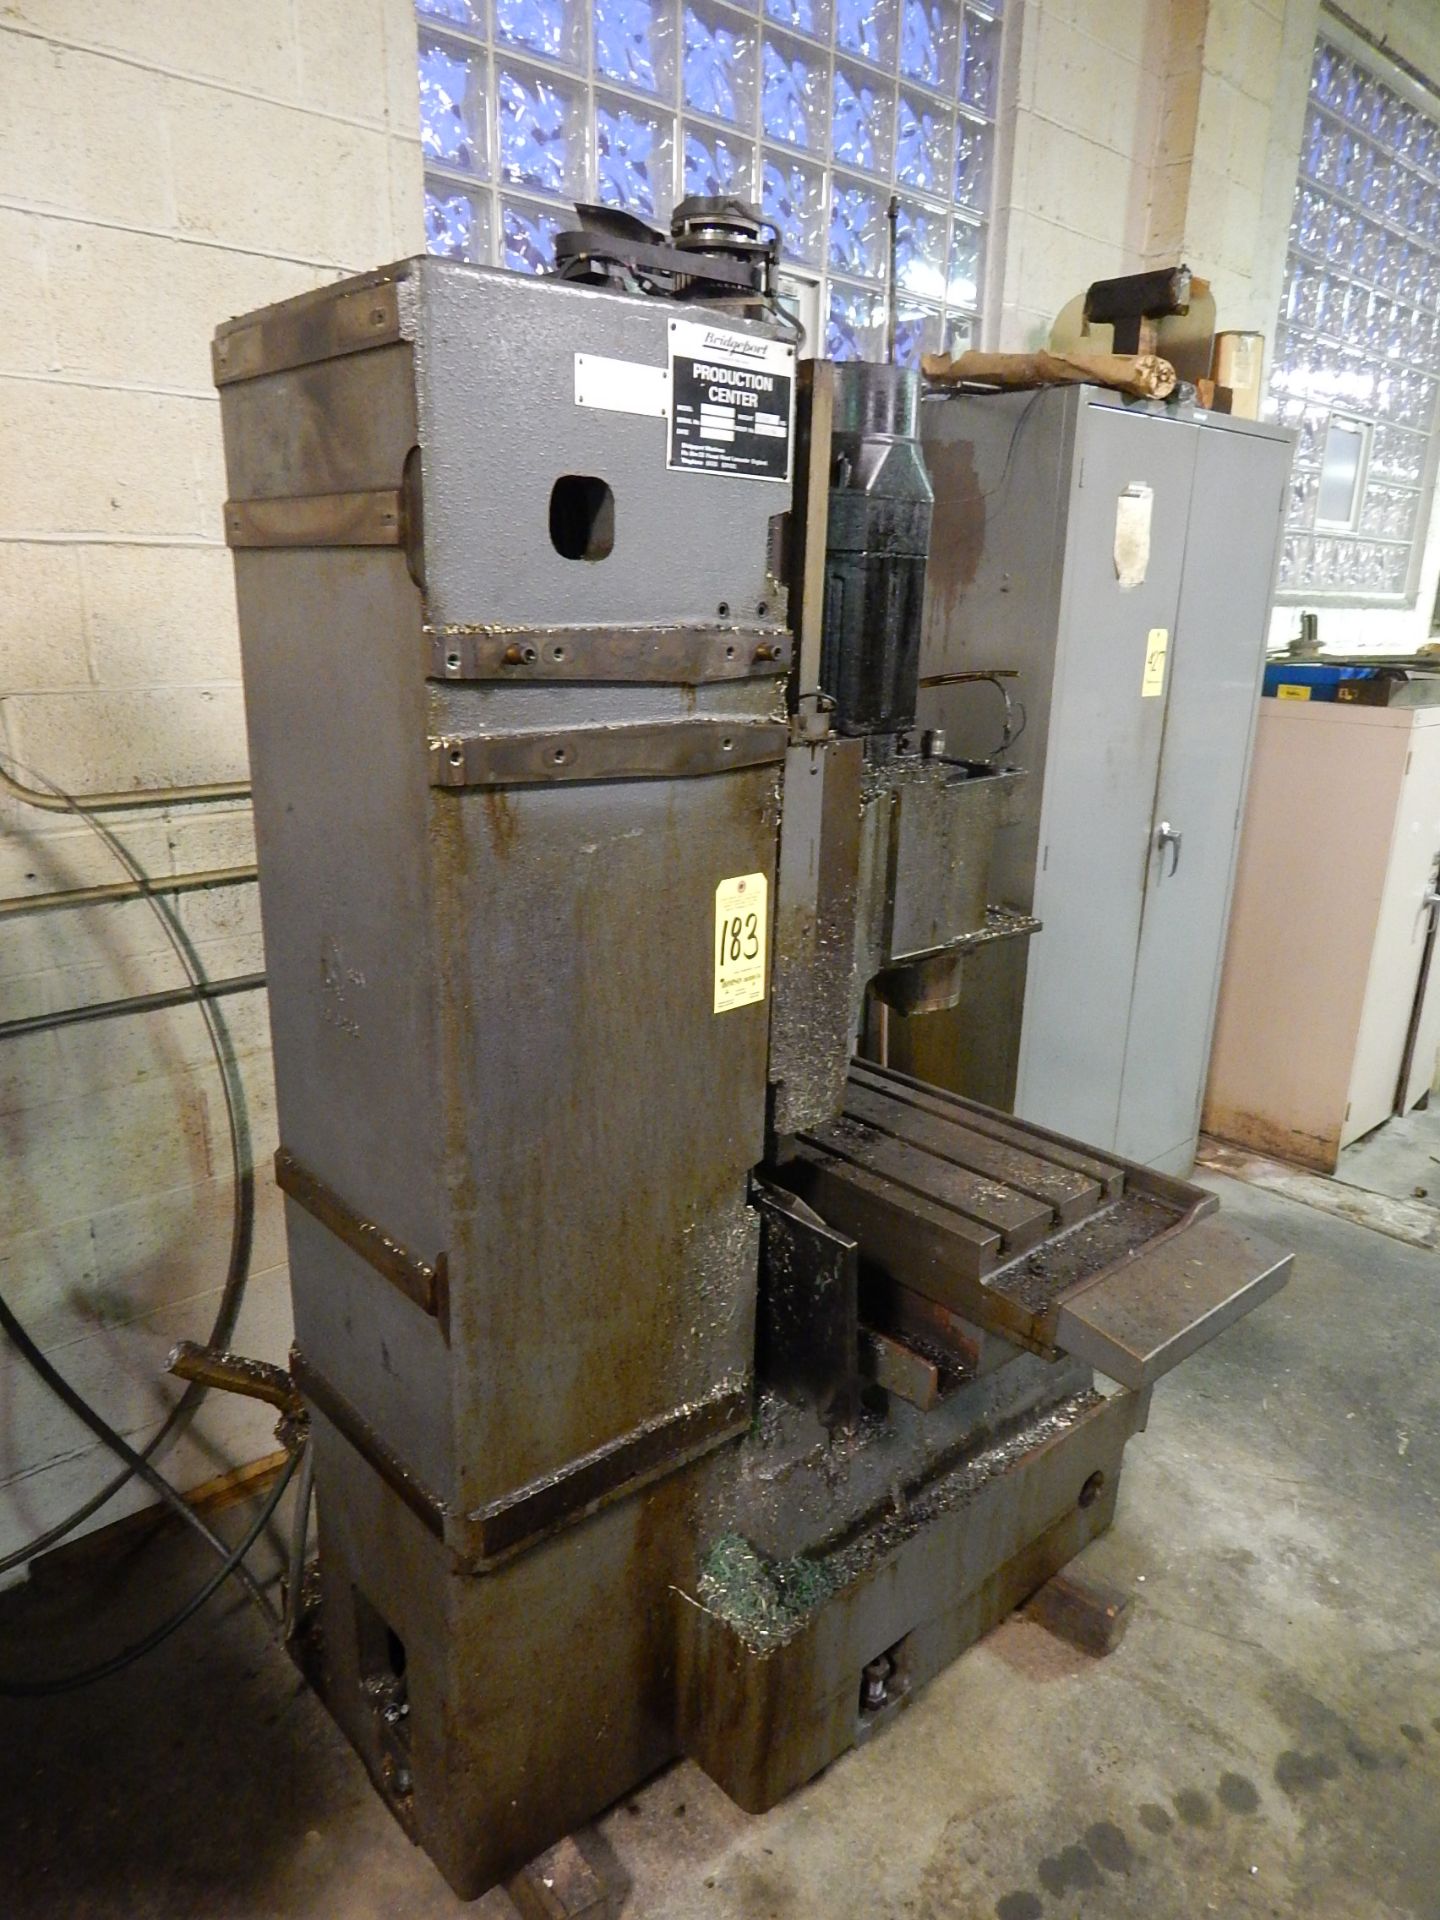 Bridgeport Interact 412, CNC Vertical Machining Center, Parts Machine, Not in Service, Loading Fee - Image 4 of 5